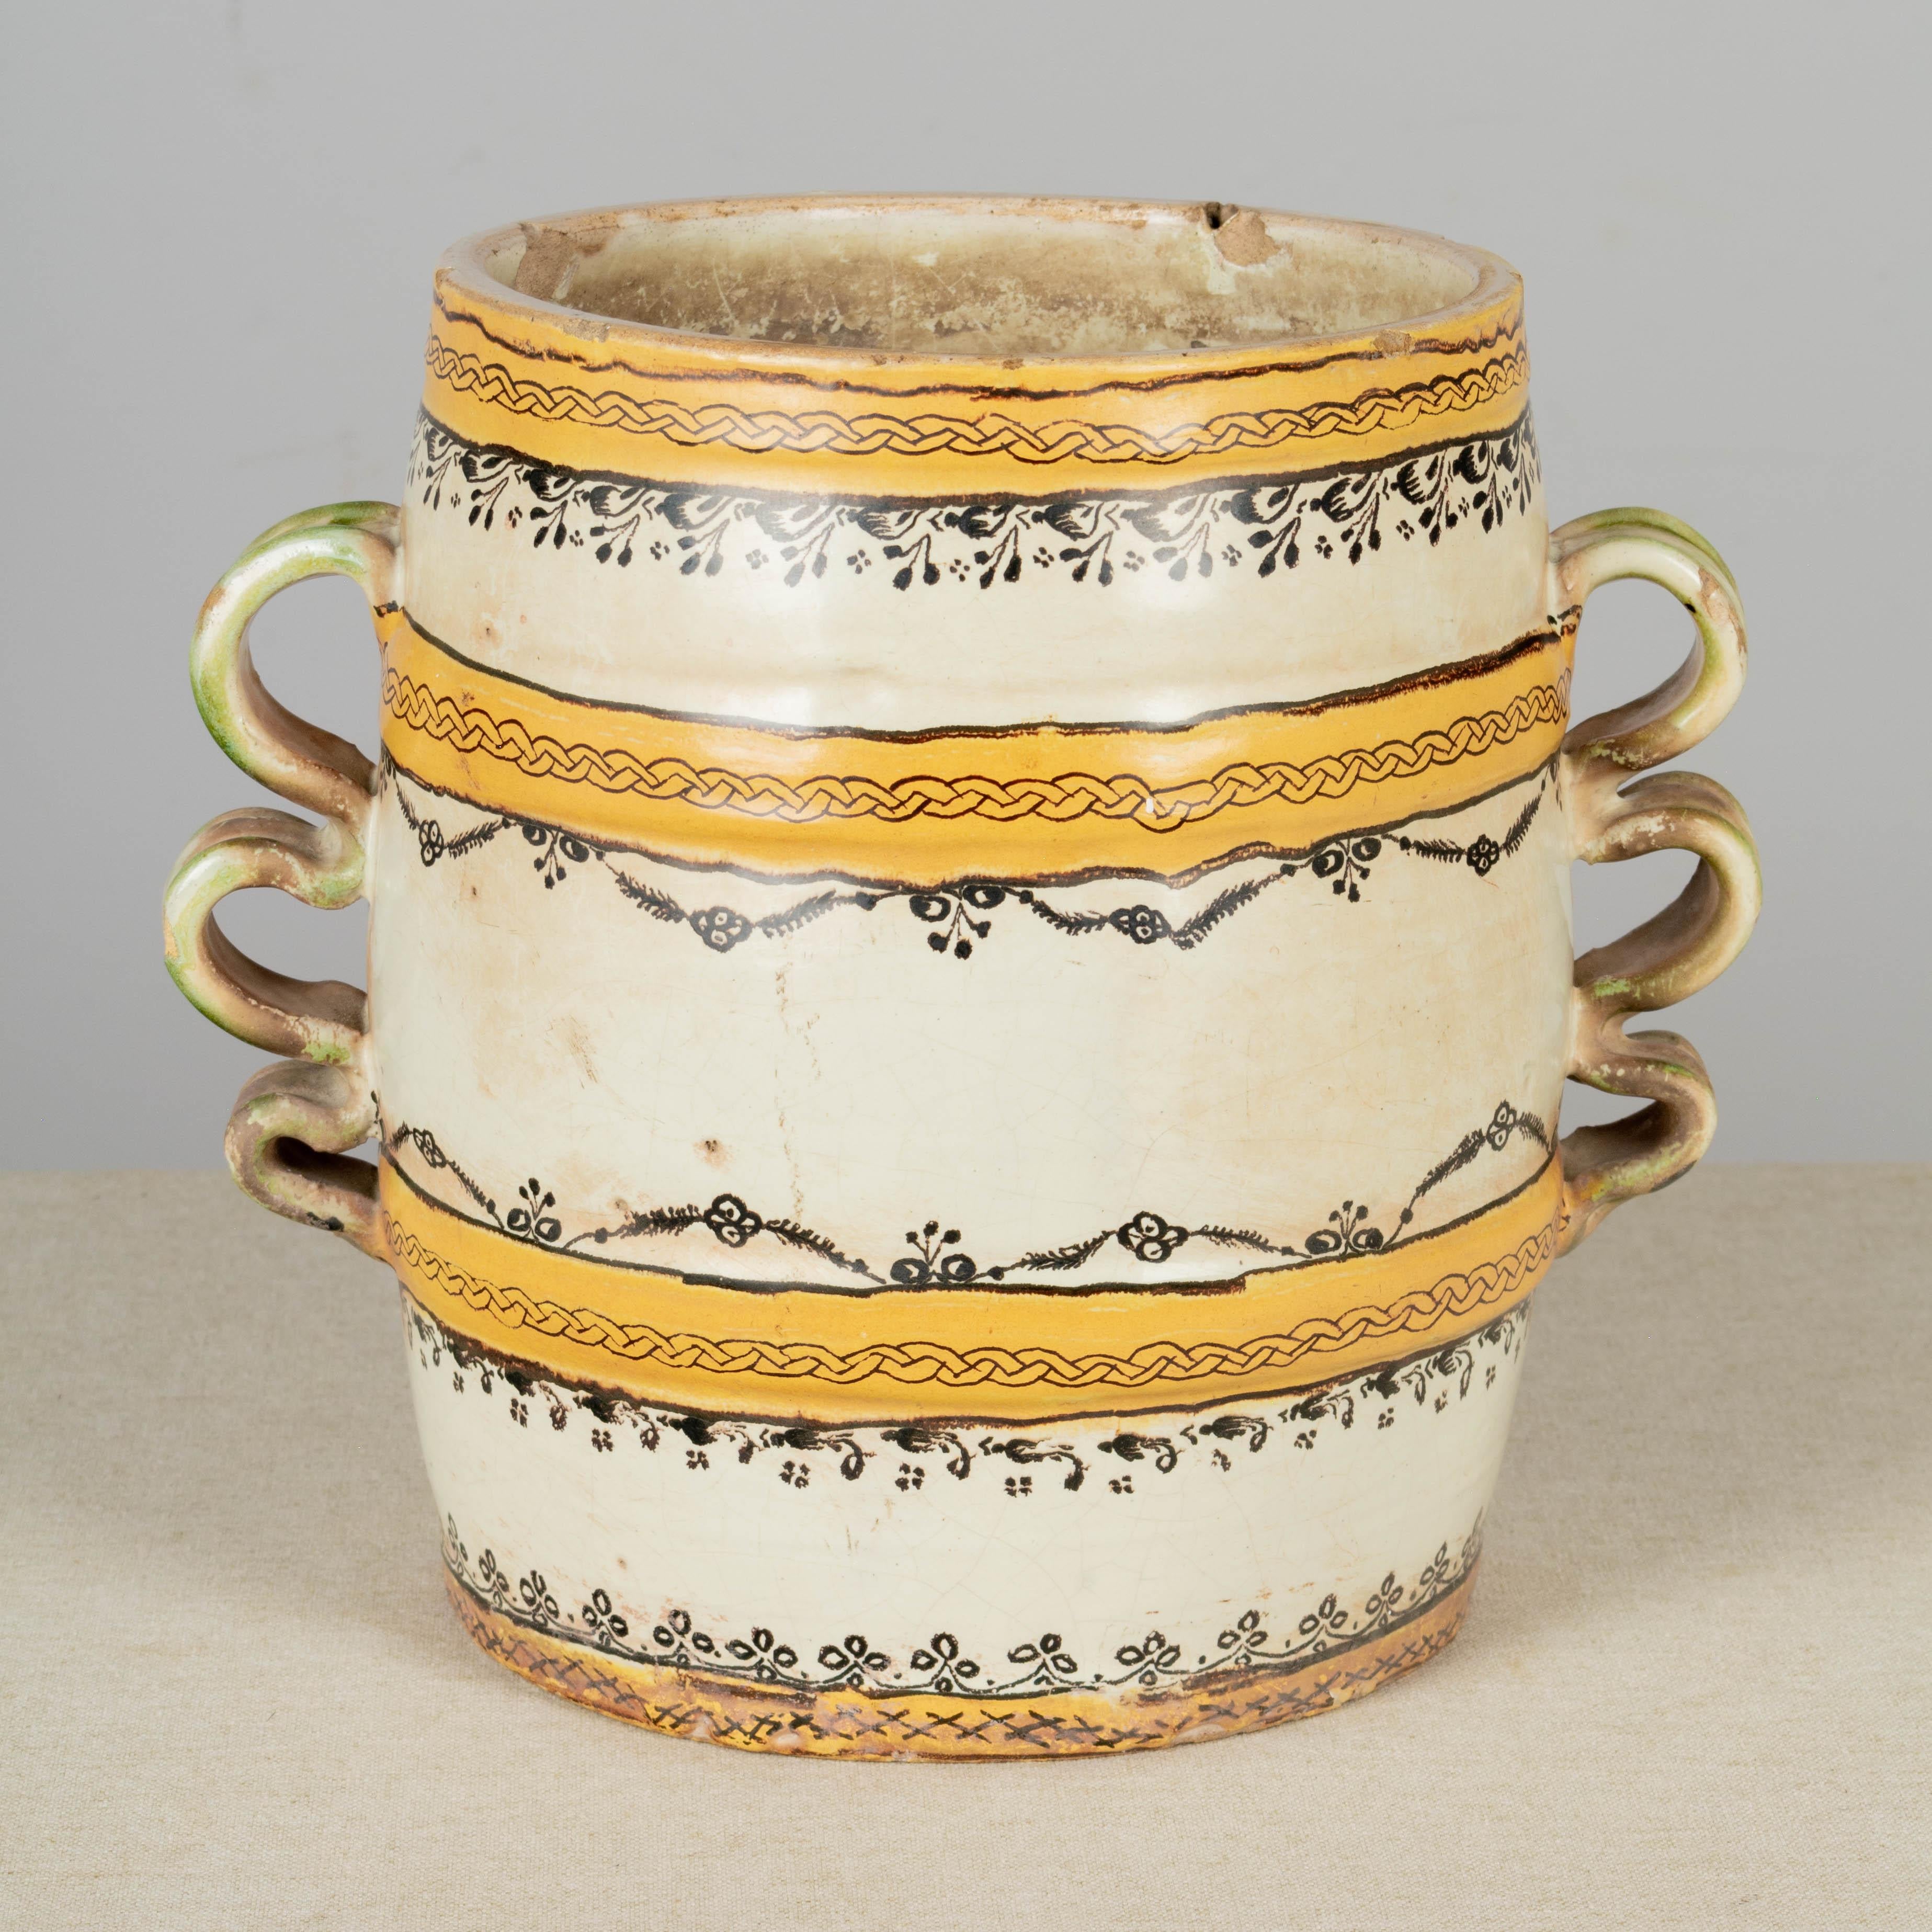 An early 19th Century white glazed terracotta earthenware pottery jar from the East of France. Decorated with yellow bands with black painted details and pale green glazed triple loop handles. Drainage hole in bottom. Rustic condition with several